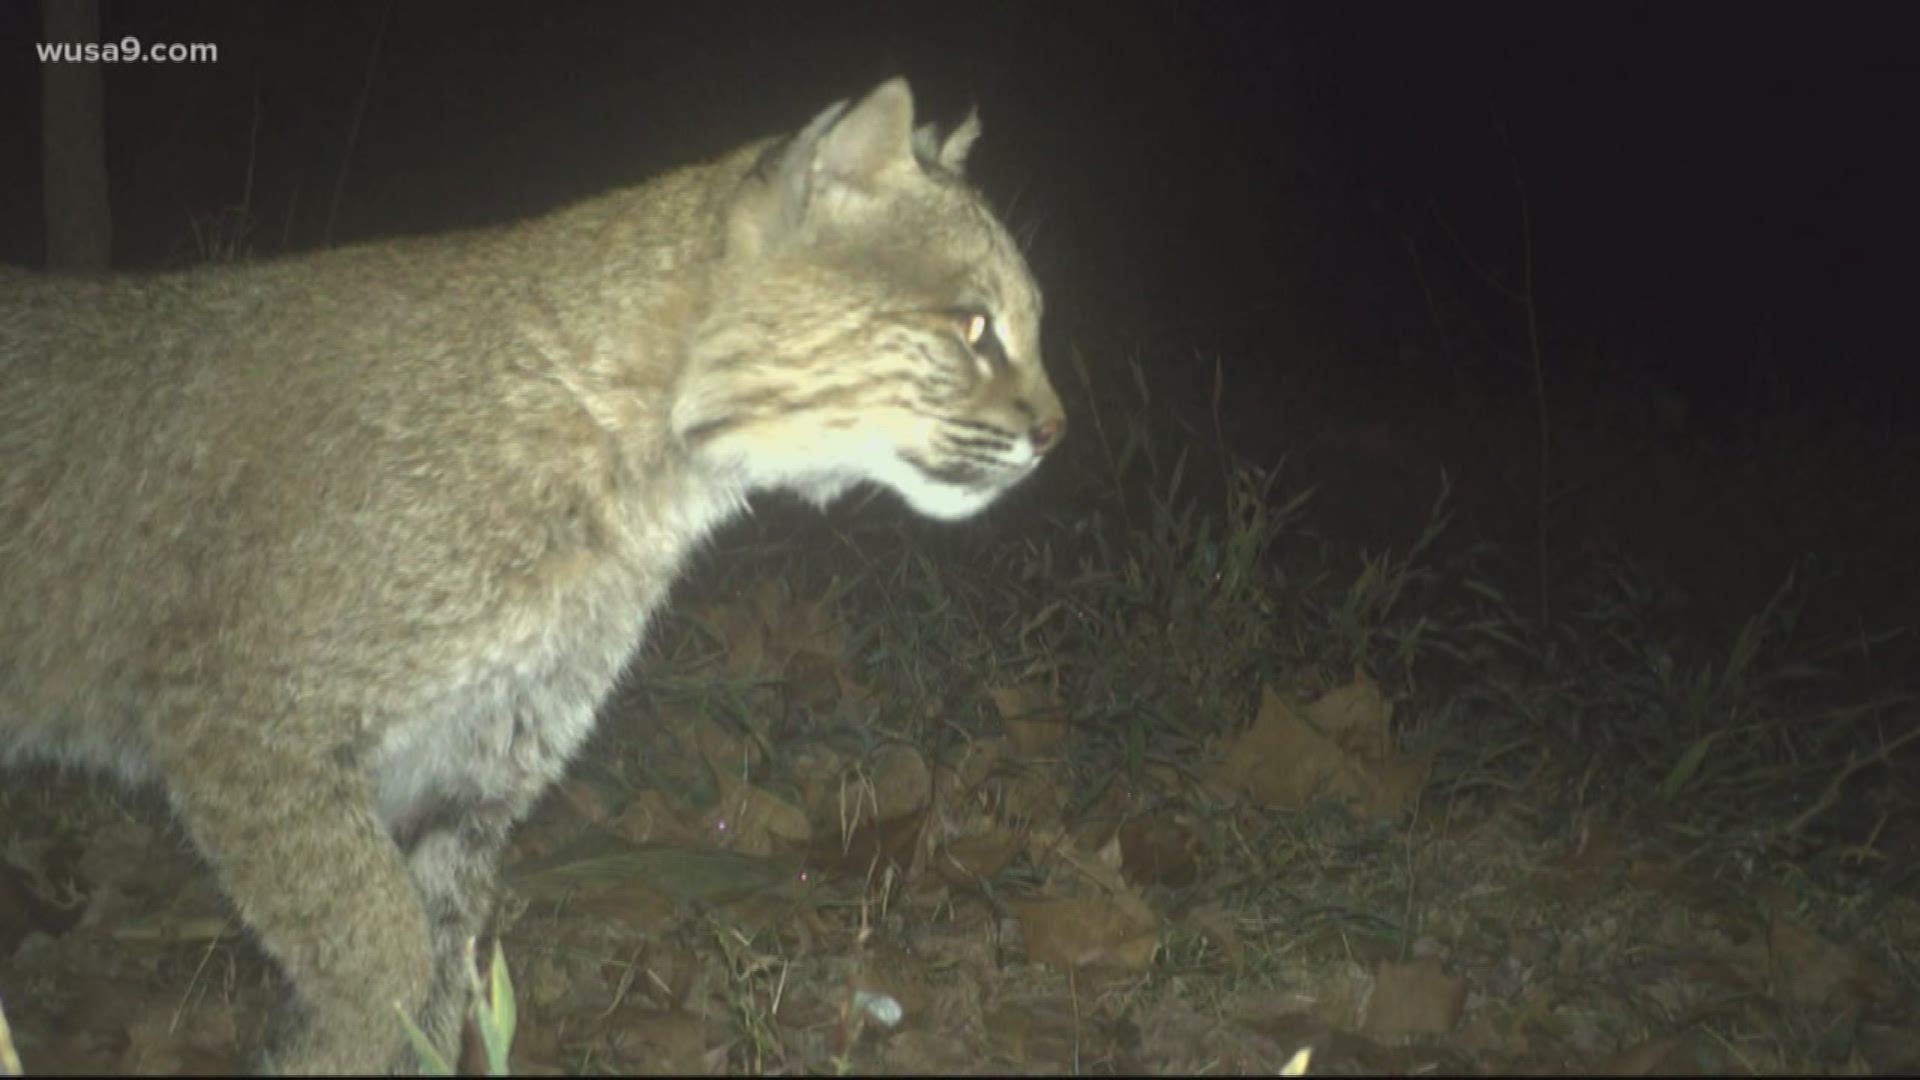 The bobcat was spotted lurking near the C and O Canal and experts believe it was looking to mate or find some food.